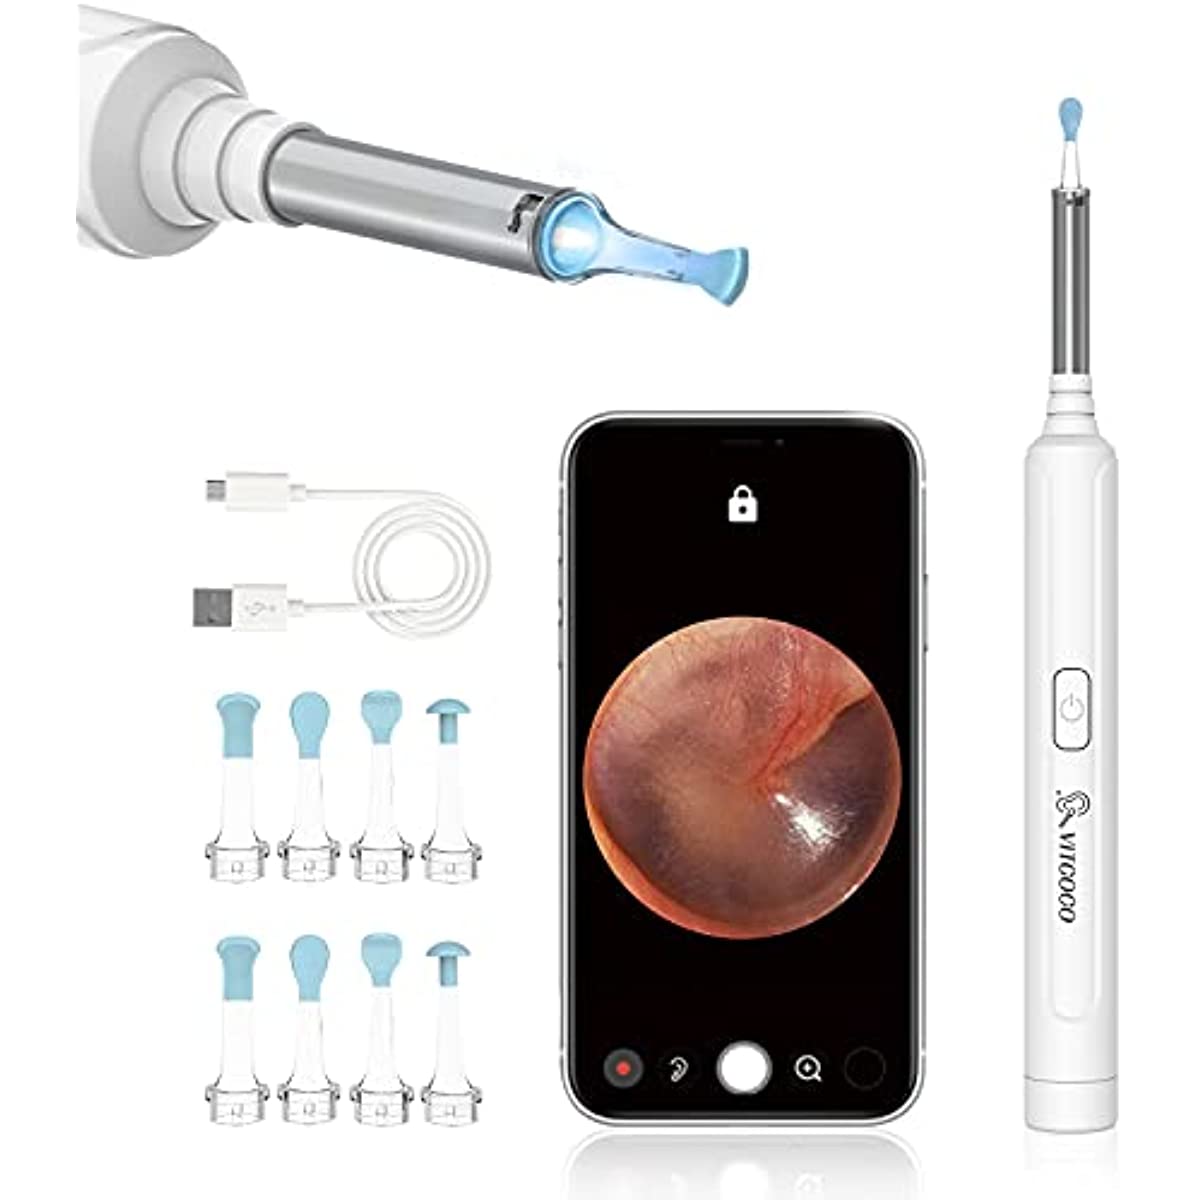 VITCOCO Ear Wax Removal Kit Ear Camera 1296P High-Definition Earwax Cleaner Portable USB Charging Visible 6 LED Otoscope for Android, iPhone, Ipad